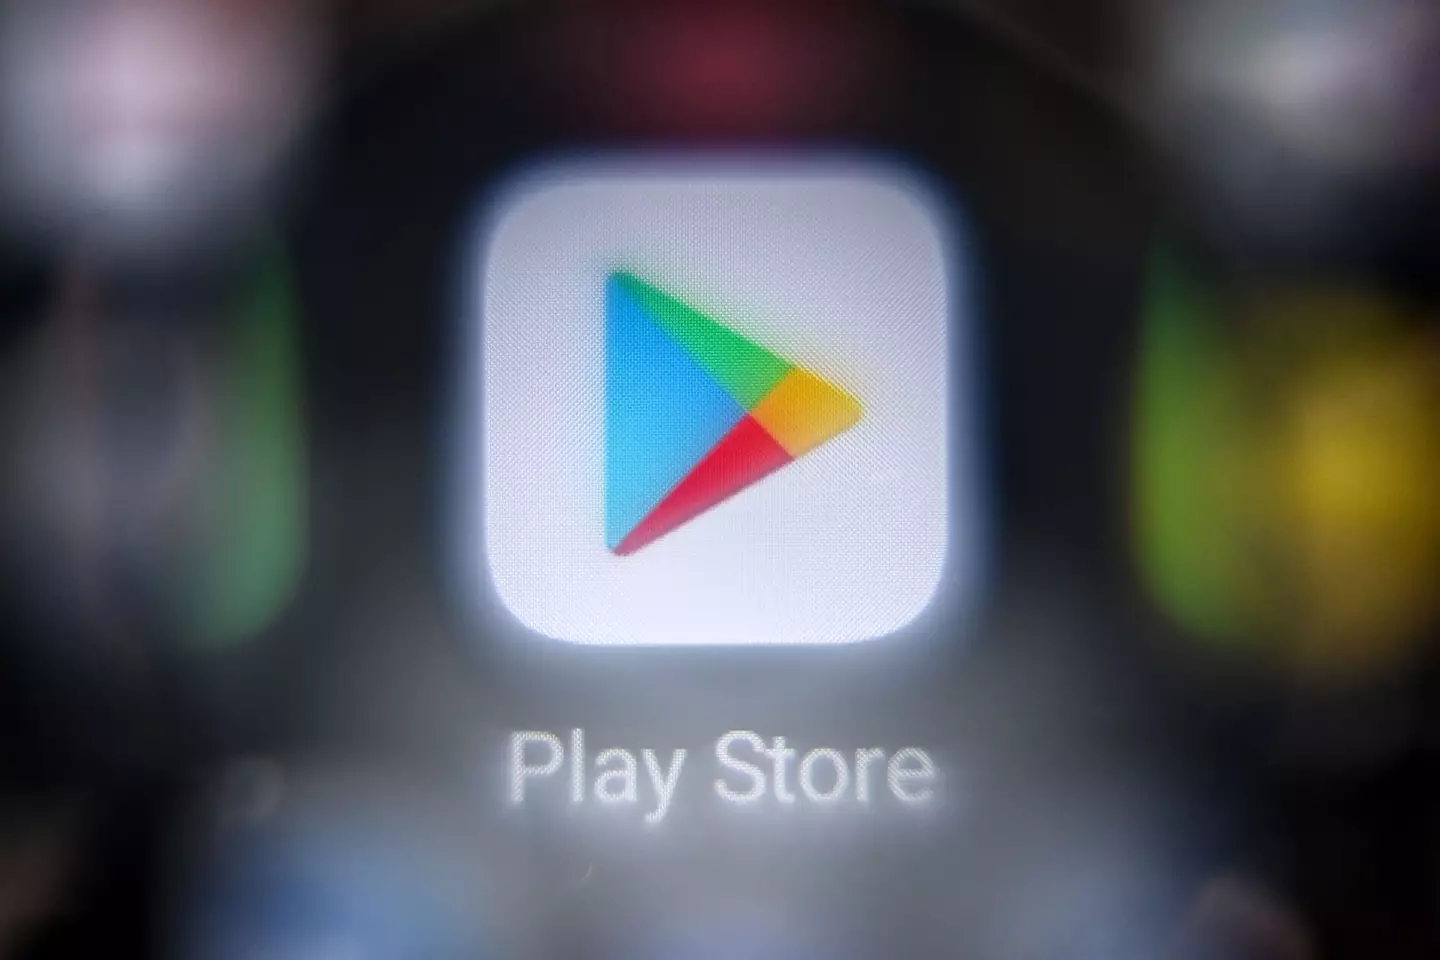 Google was accused of anticompetitive conduct related to its Play Store.